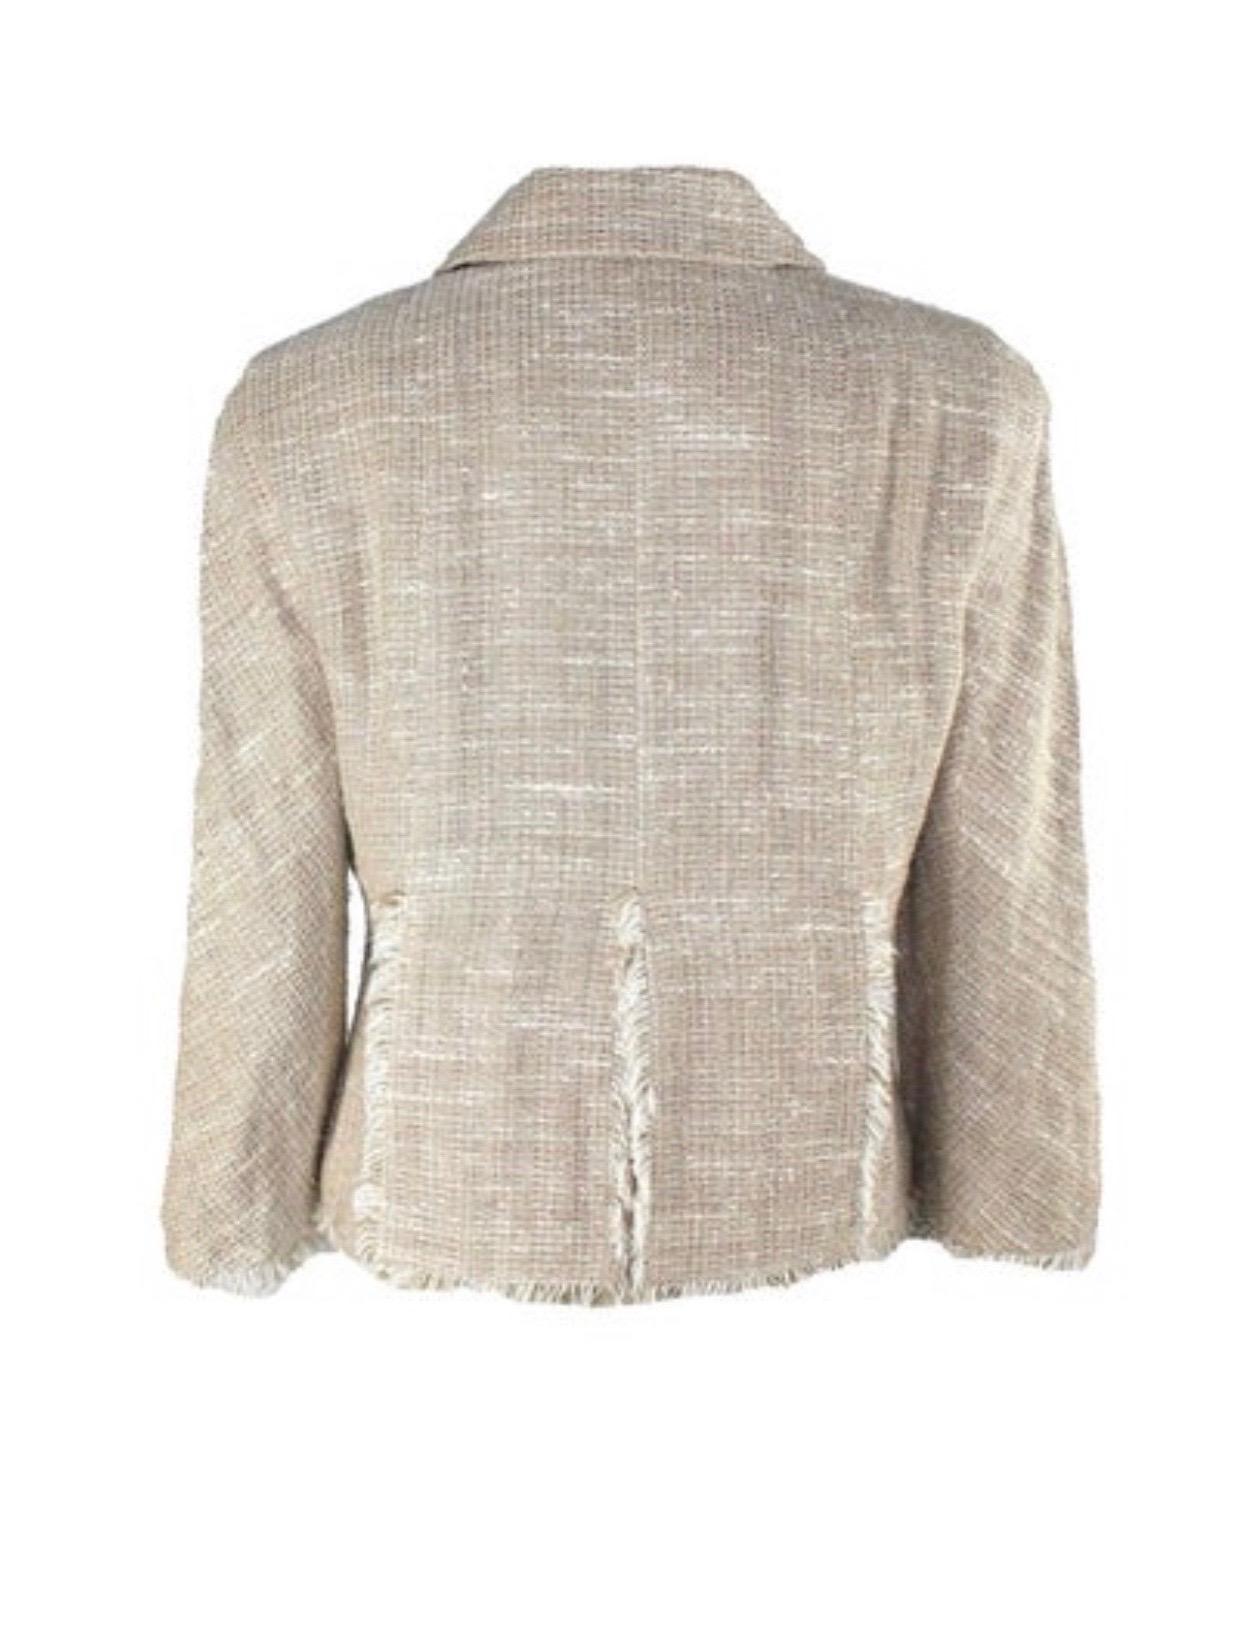 Chanel signature jacket - perfect for the summer!
A timeless classic that should be in every woman's wardrobe
So versatile - goes with jeans, pants, skirts, dresses and will always look classy!
Finest woven linen tweed exclusively produced by Maison